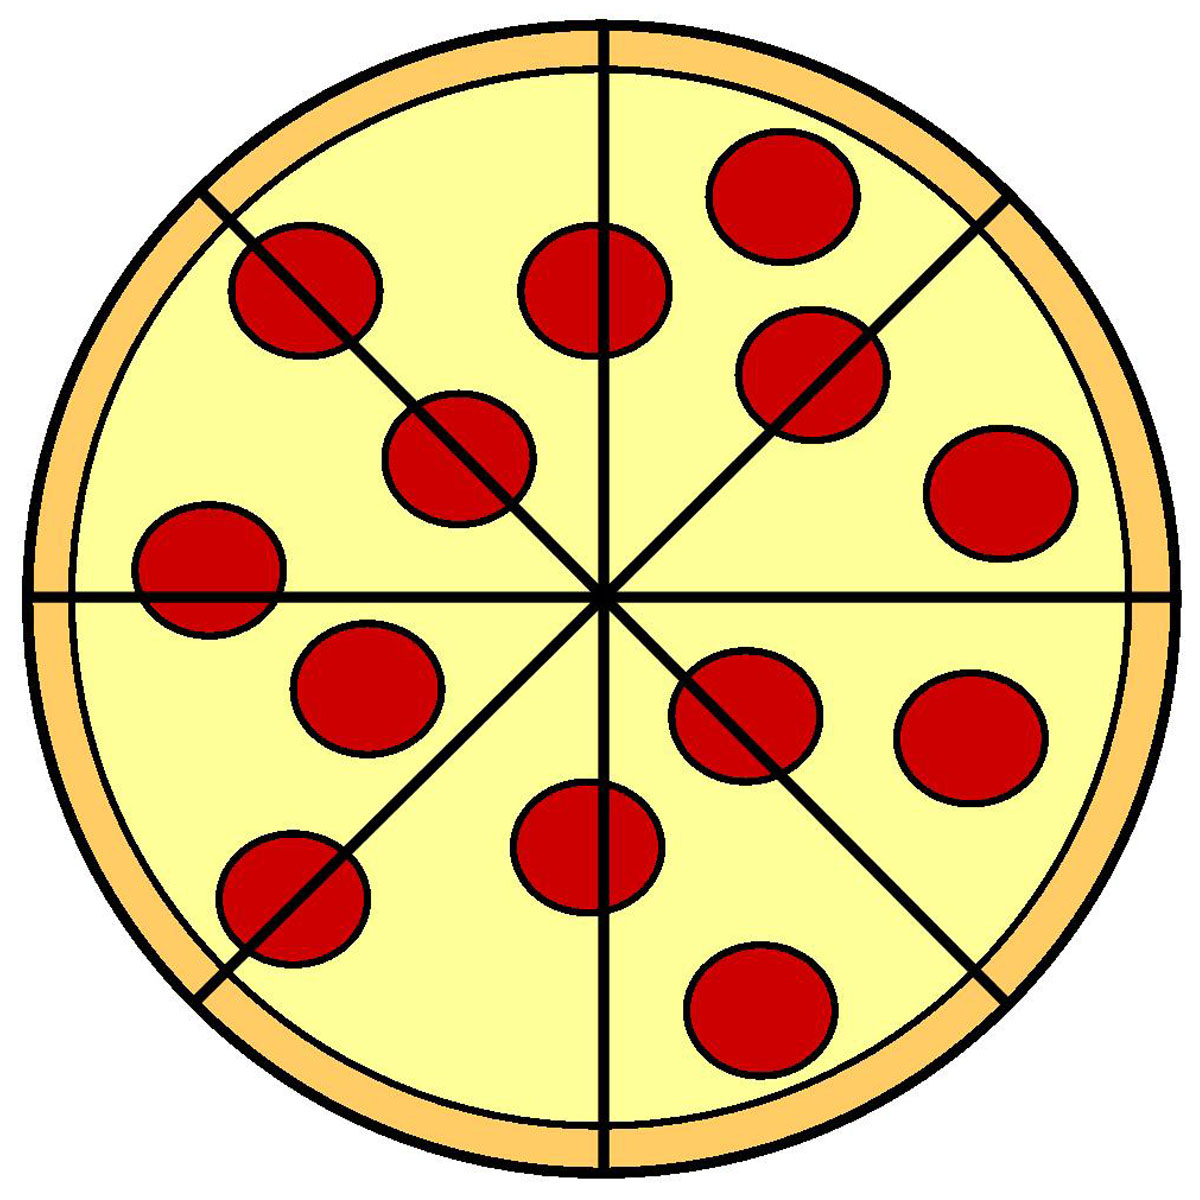 Cartoon Pepperoni Pizza Images & Pictures - Becuo